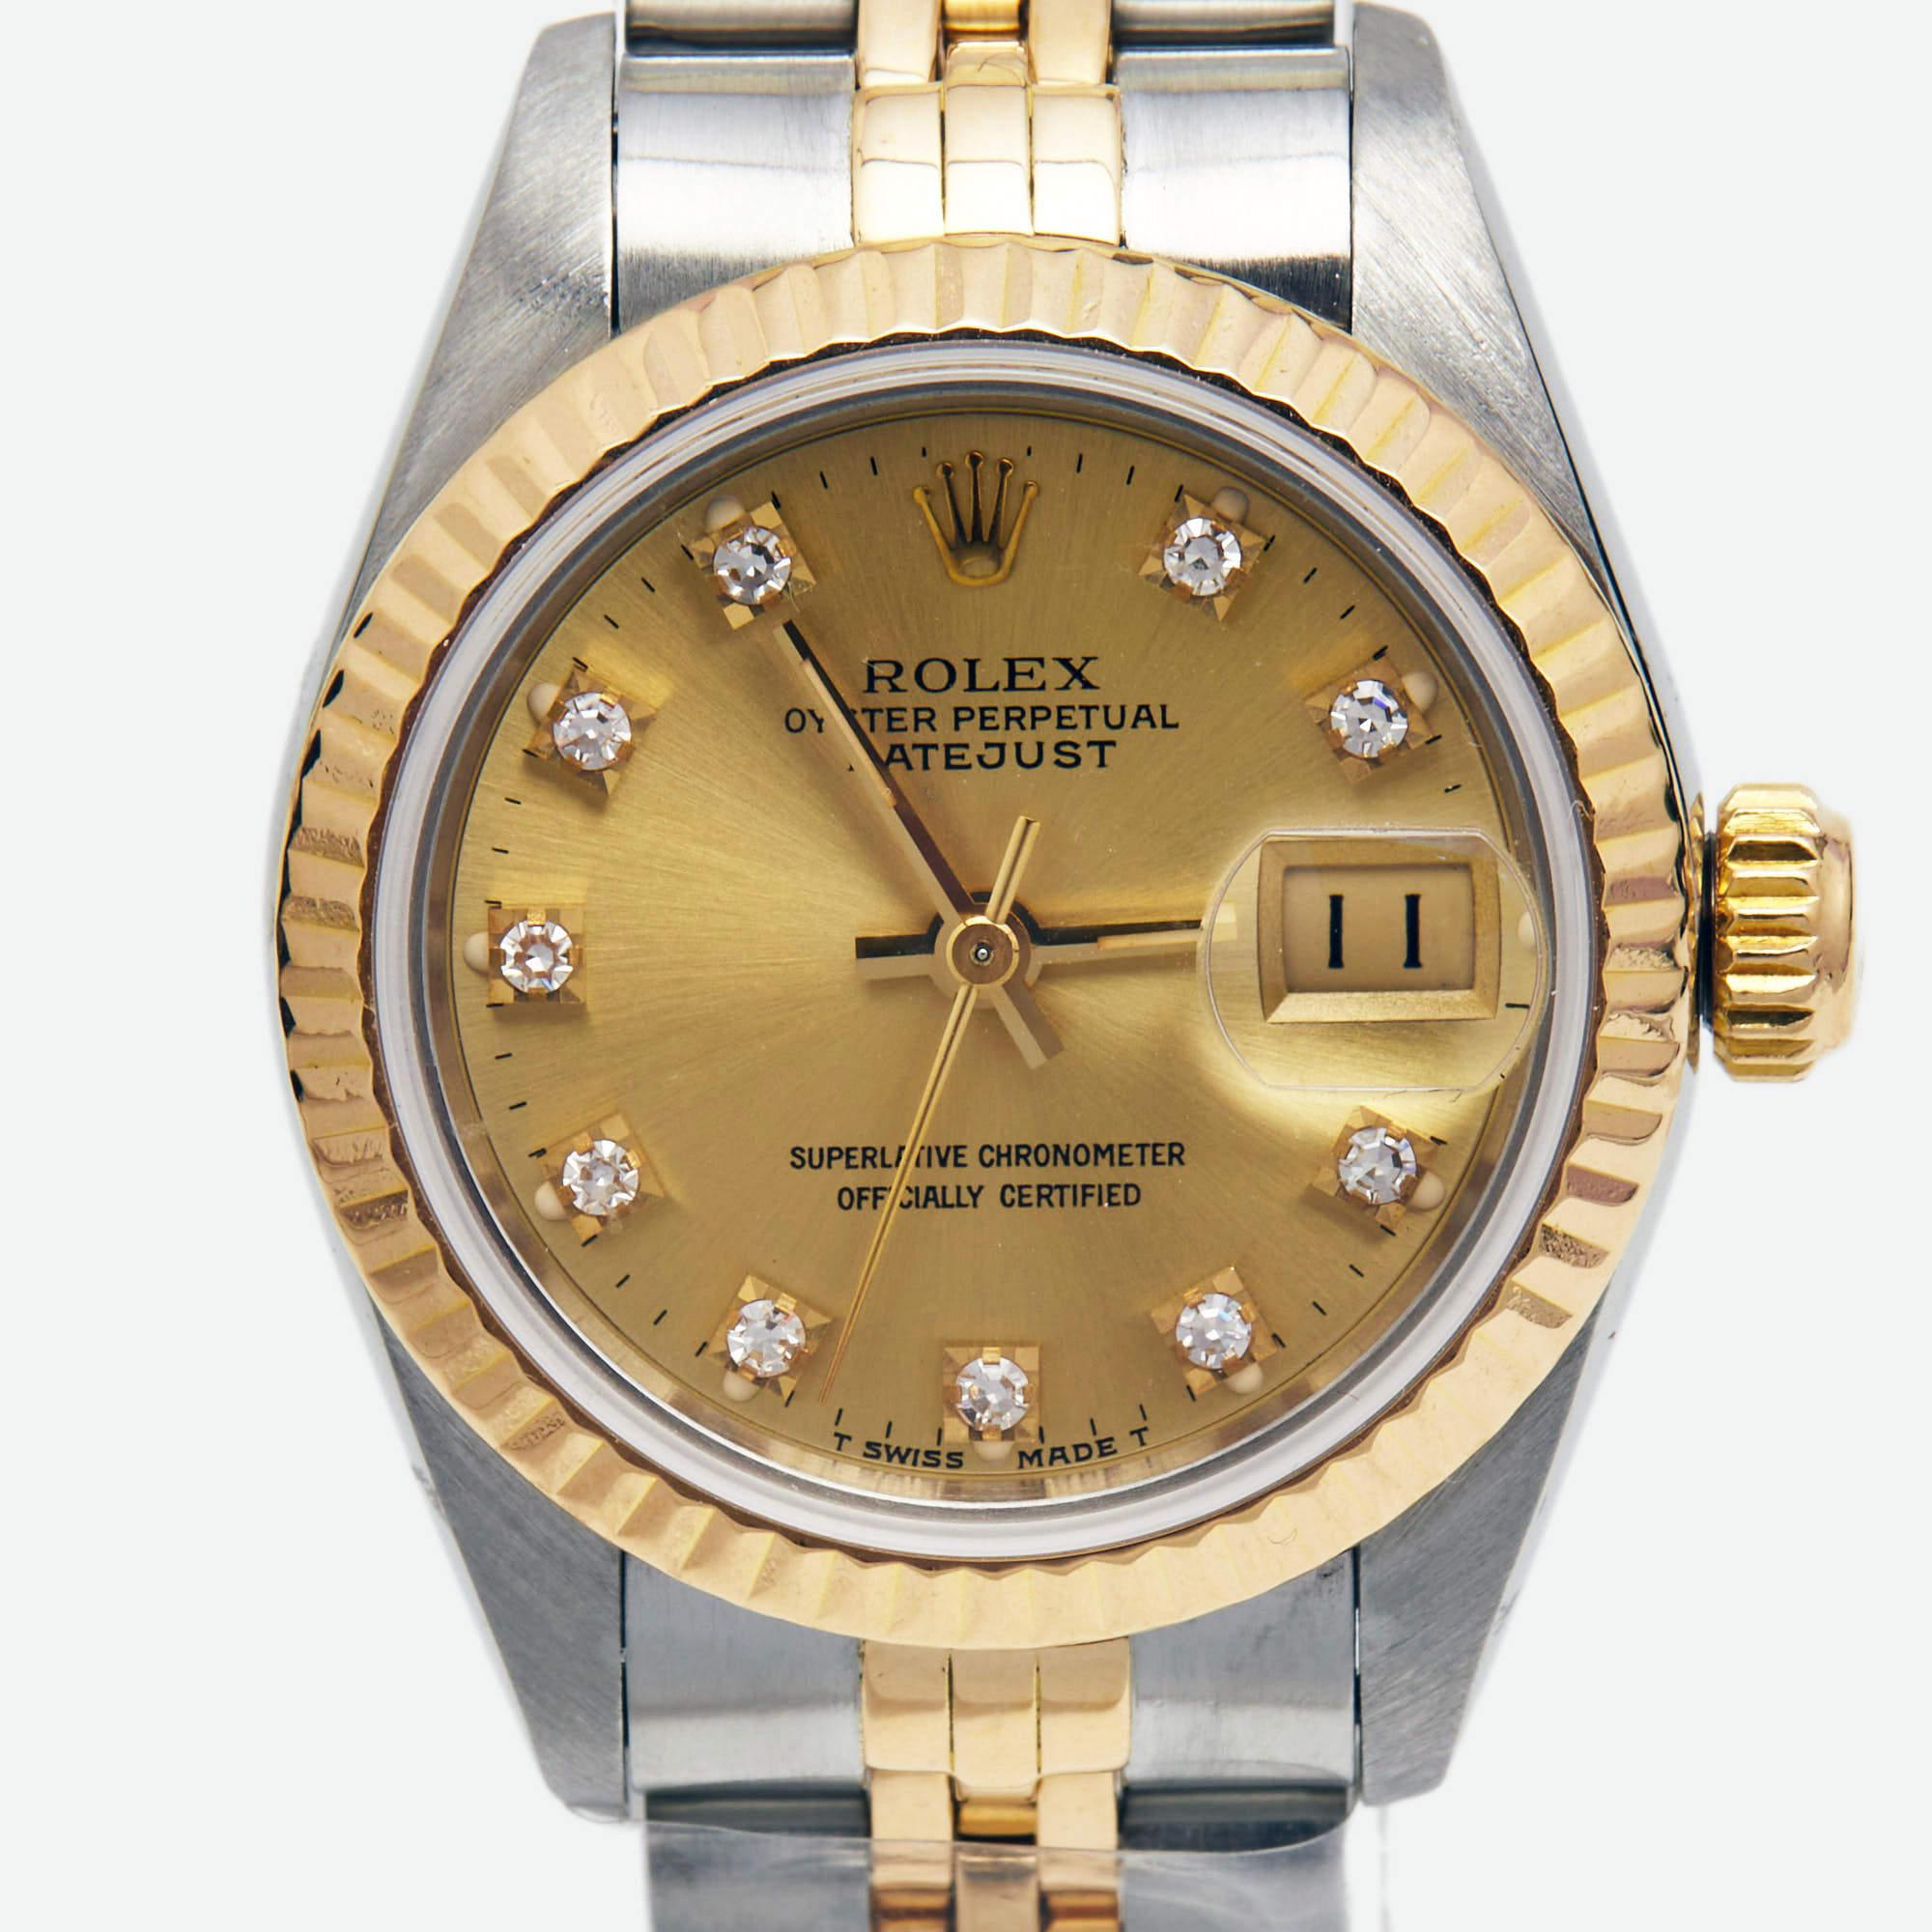 The Datejust is one of the most recognized and coveted watches from the house of Rolex. It has a distinct look and an irrefutable appeal. Crafted beautifully, this authentic Rolex Datejust 69173 wristwatch in 18k yellow gold & stainless steel has